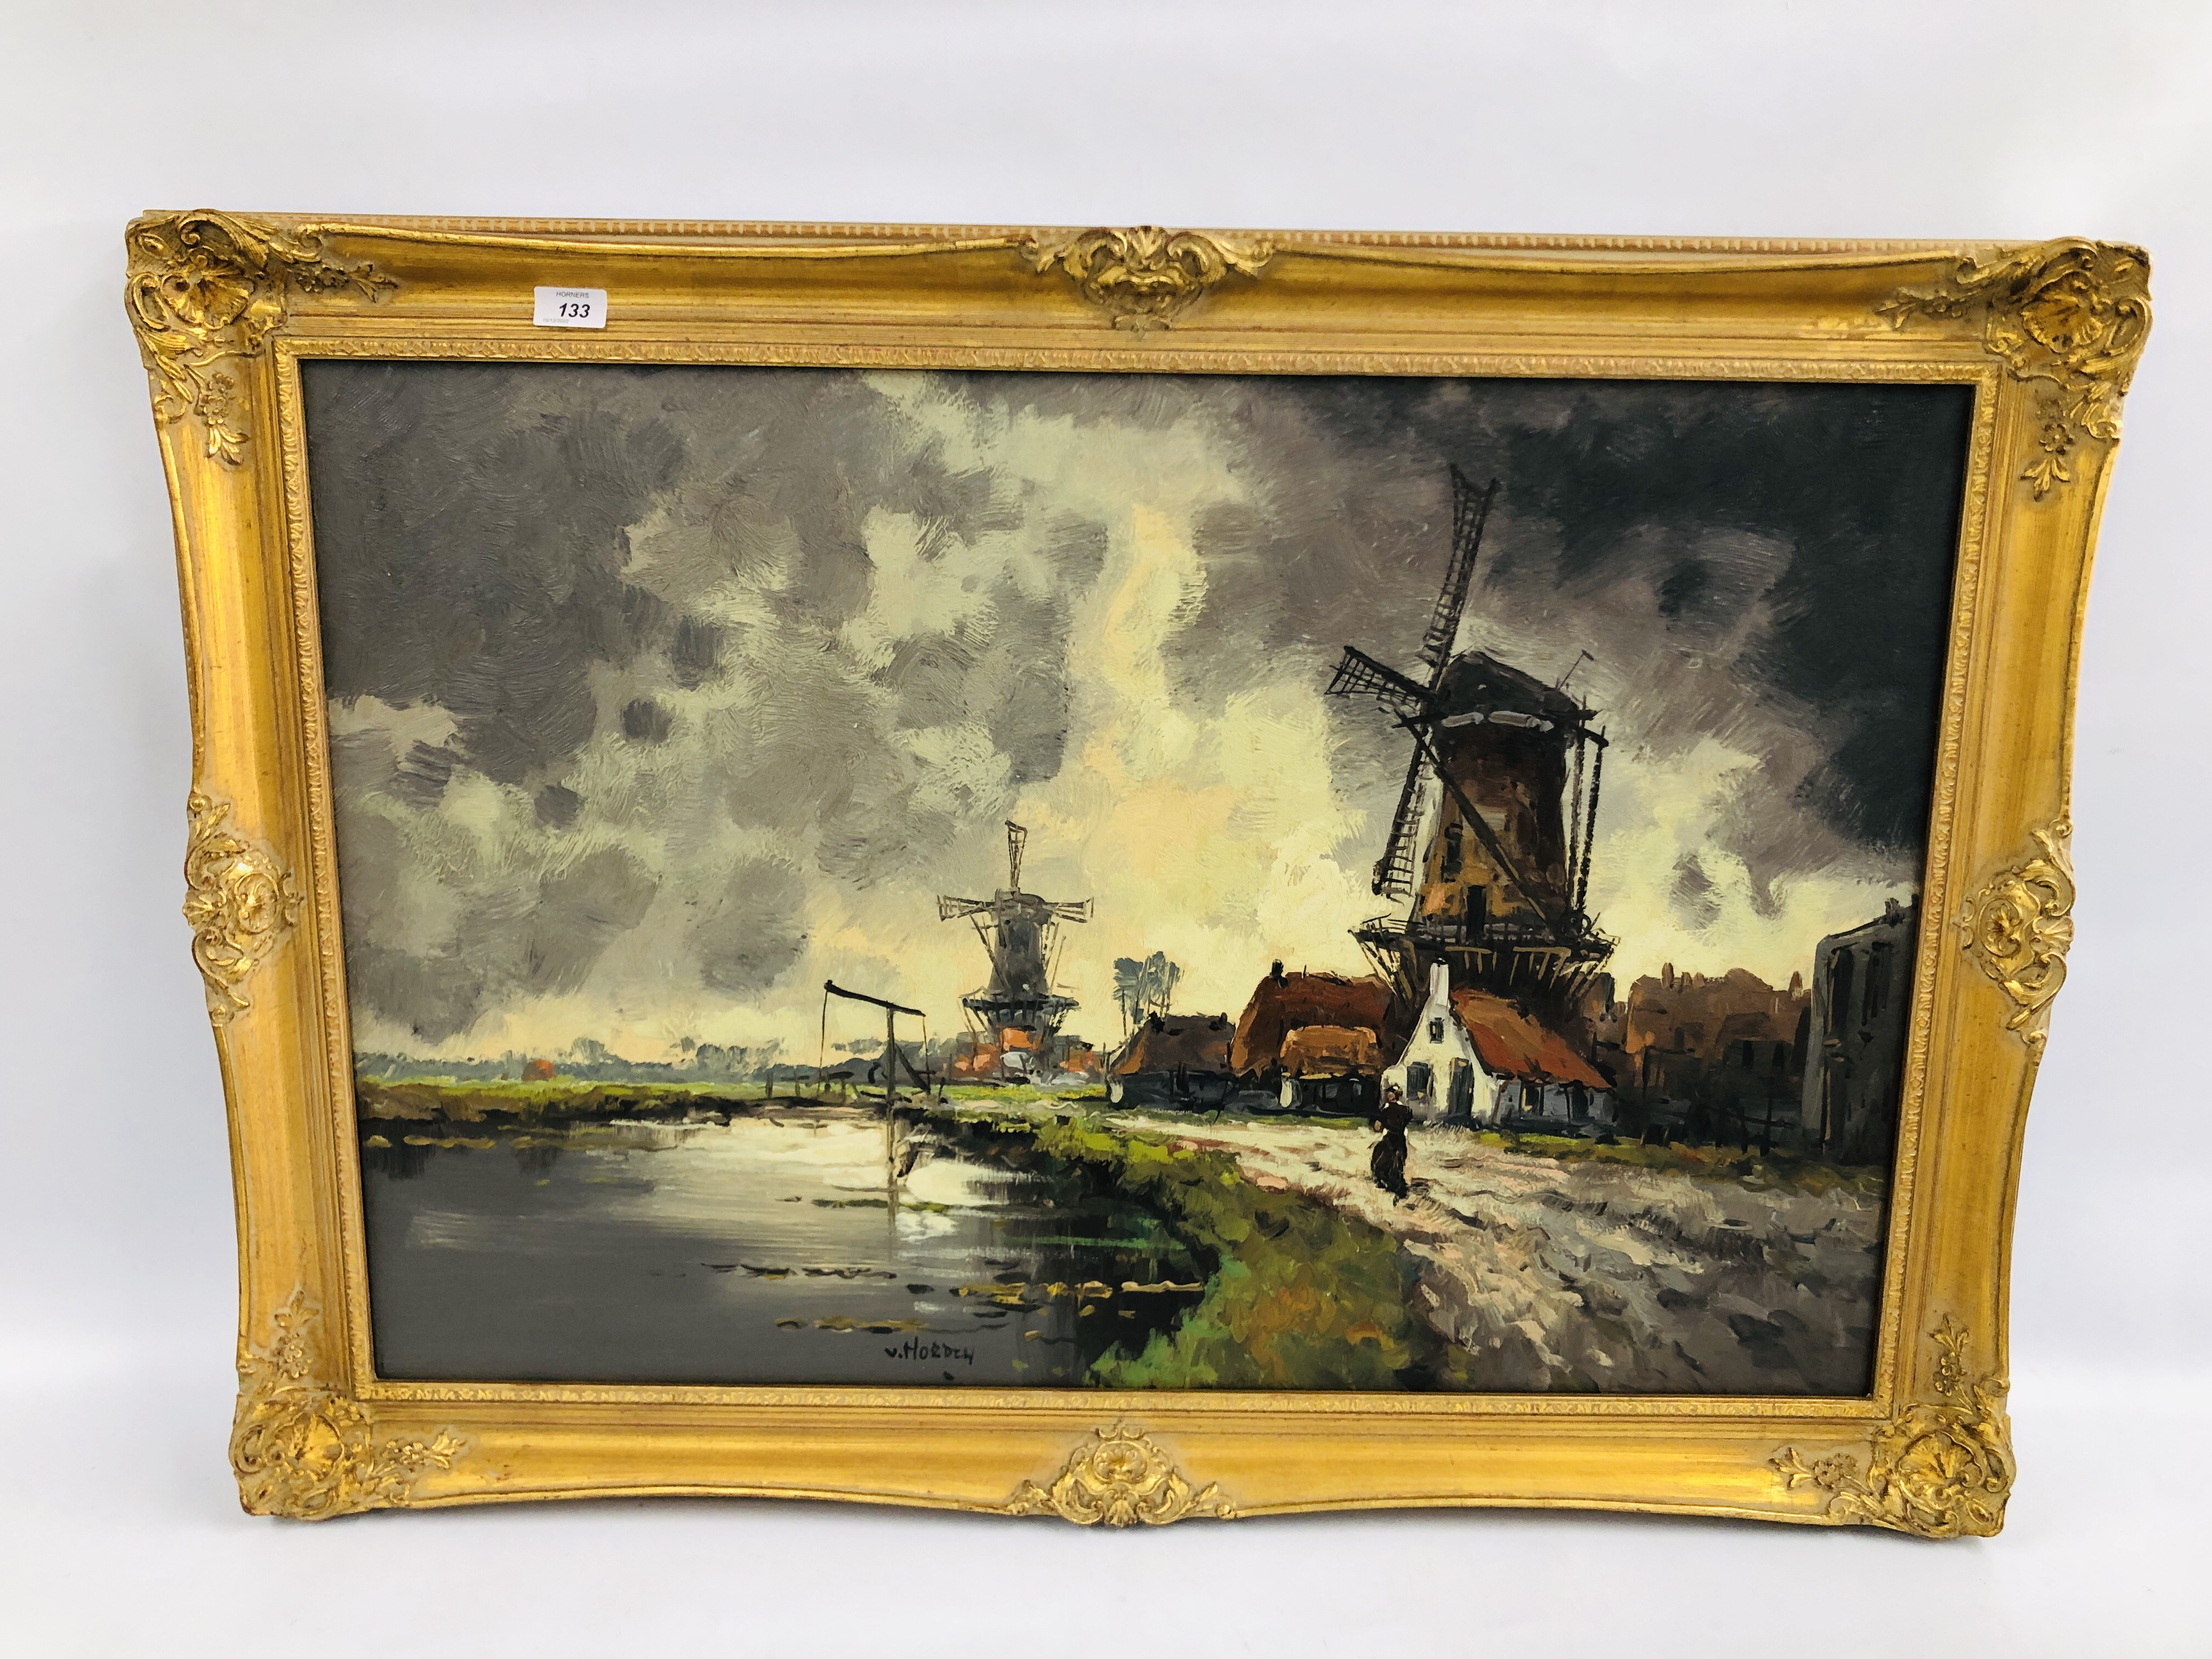 V. HORDEN (C20th NETHERLANDISH) RURAL SCENE WITH TWO WINDMILLS, OIL ON CANVAS, 60 X 90CM.